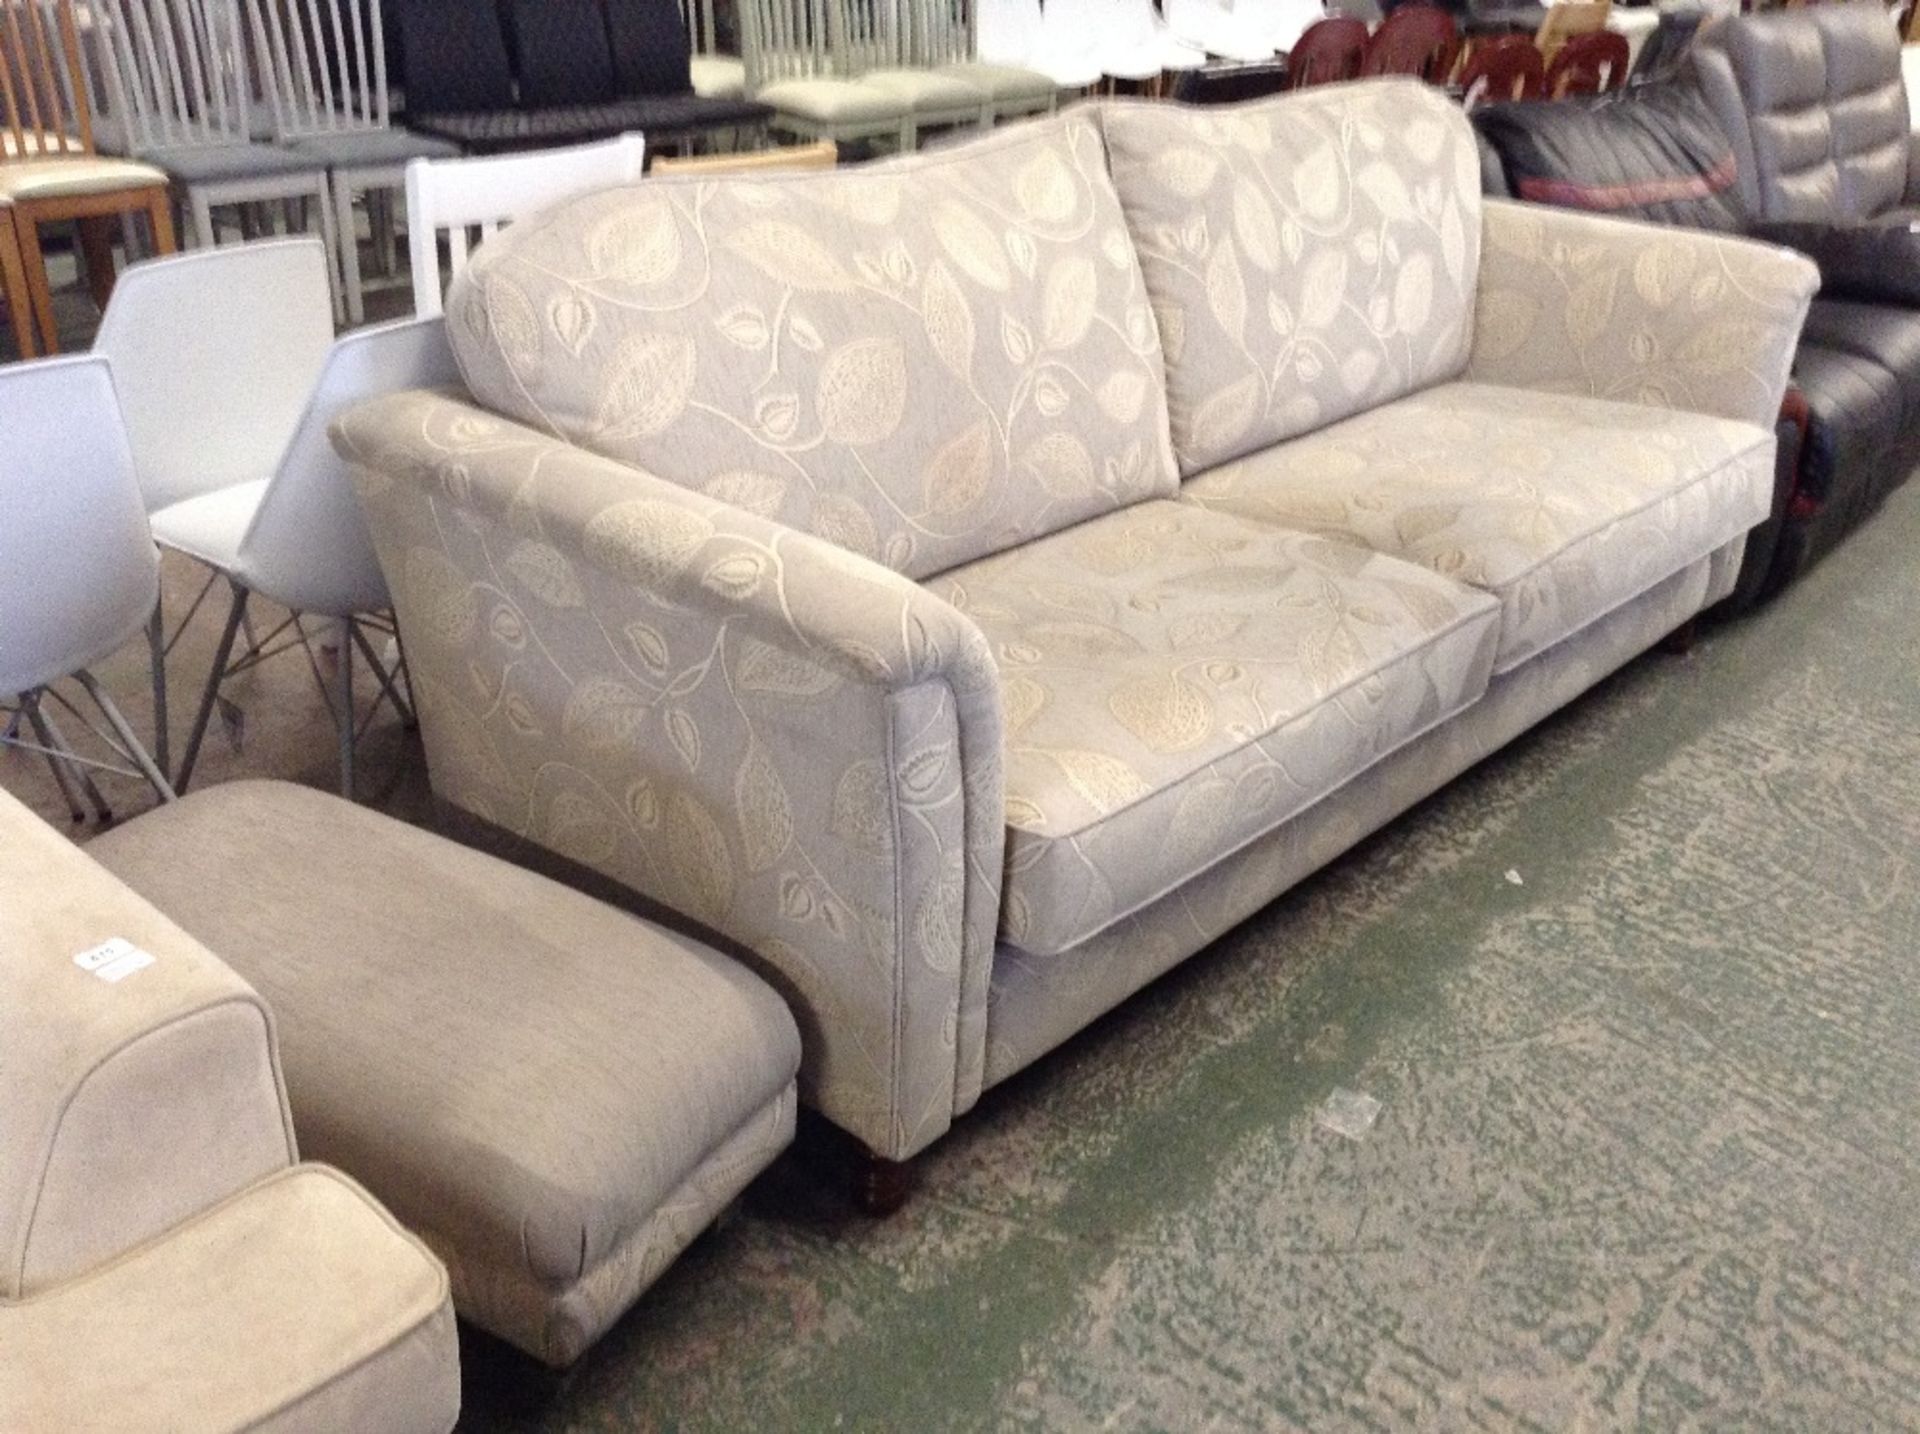 BEIGE FLORAL PATTERNED LARGE 3 SEATER SOFA AND FOO